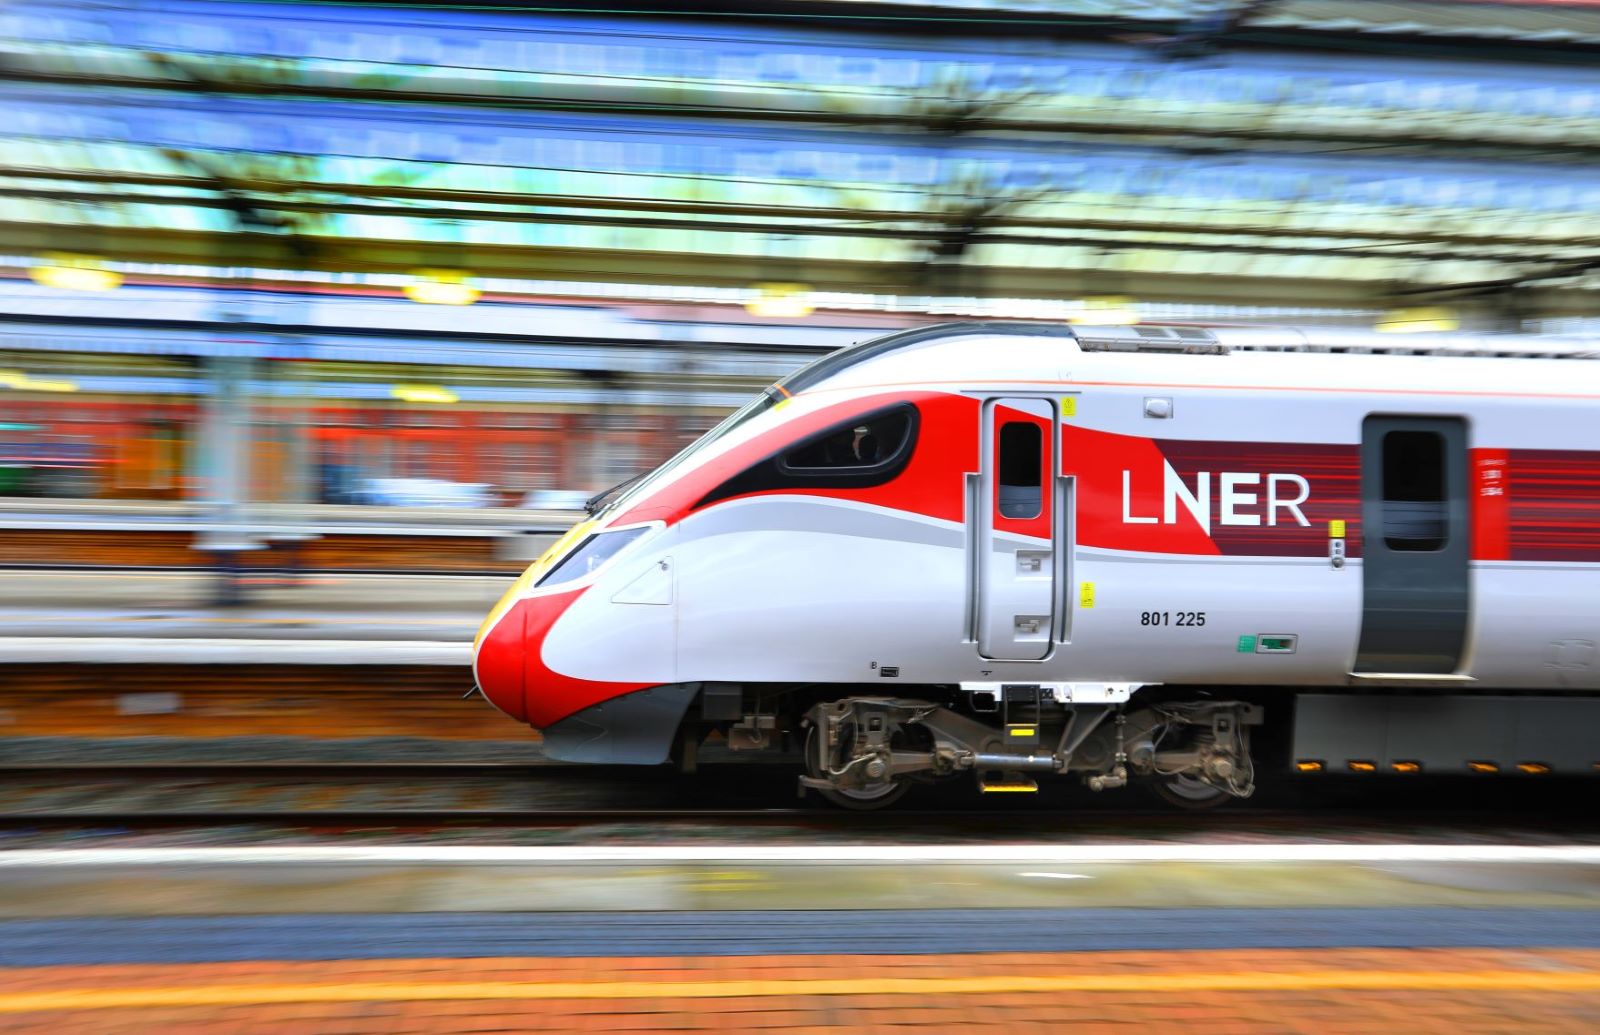 LNER Begins Global Search For Innovation To Ignite Growth In The Rail Industry